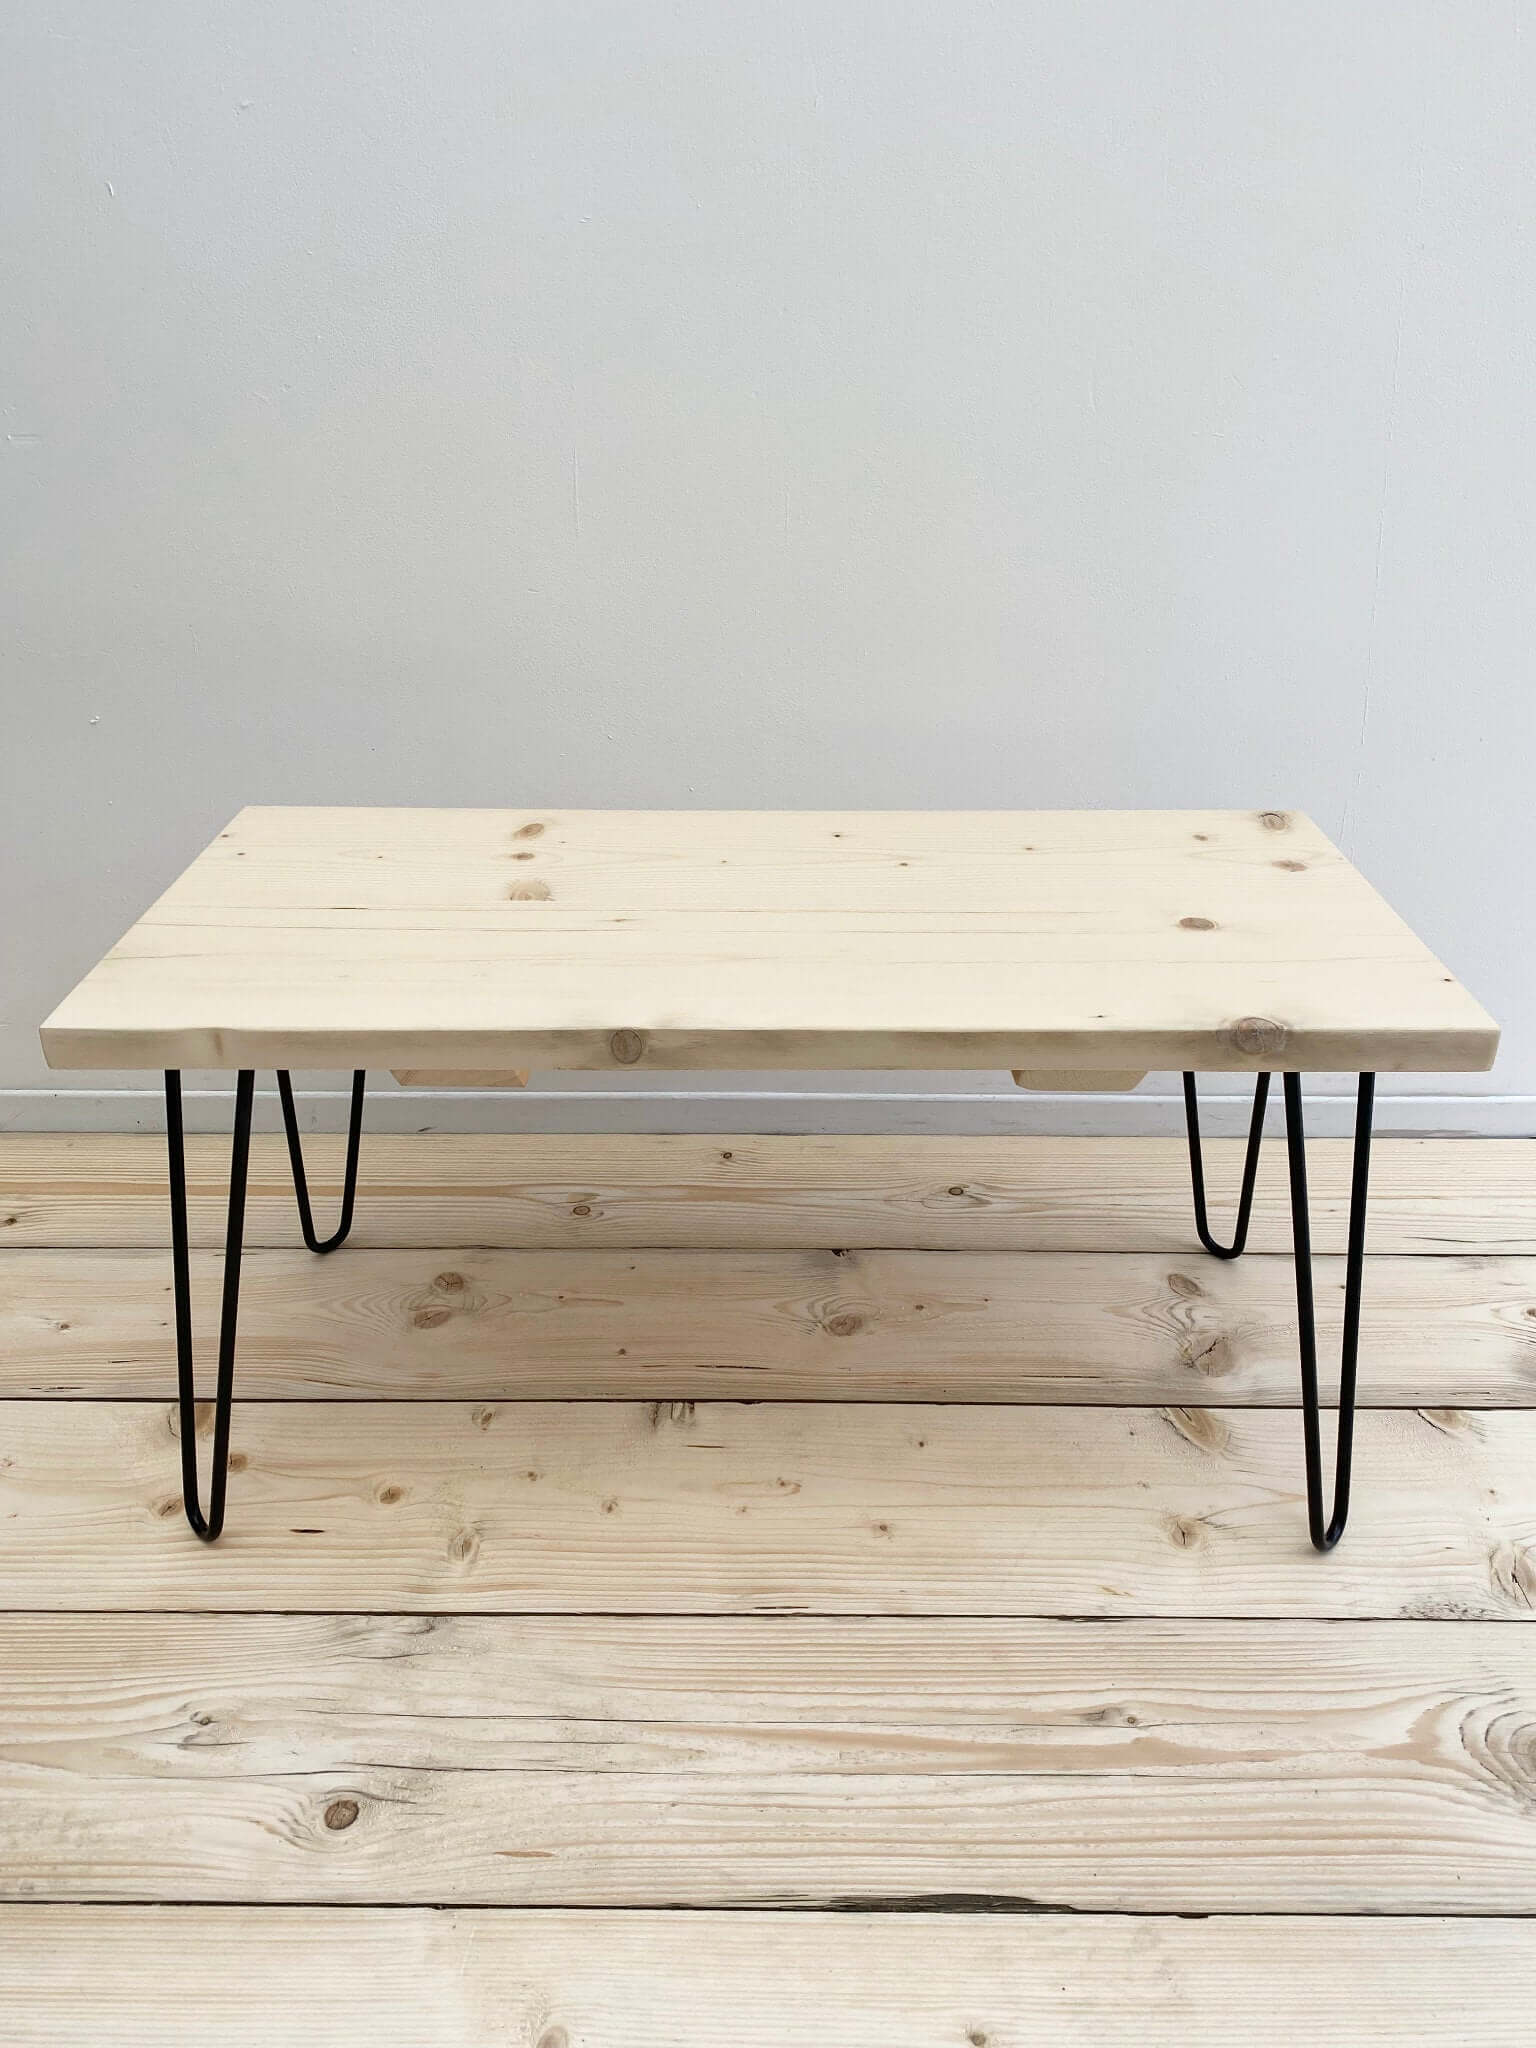 Reclaimed wood coffee table with hairpin legs.